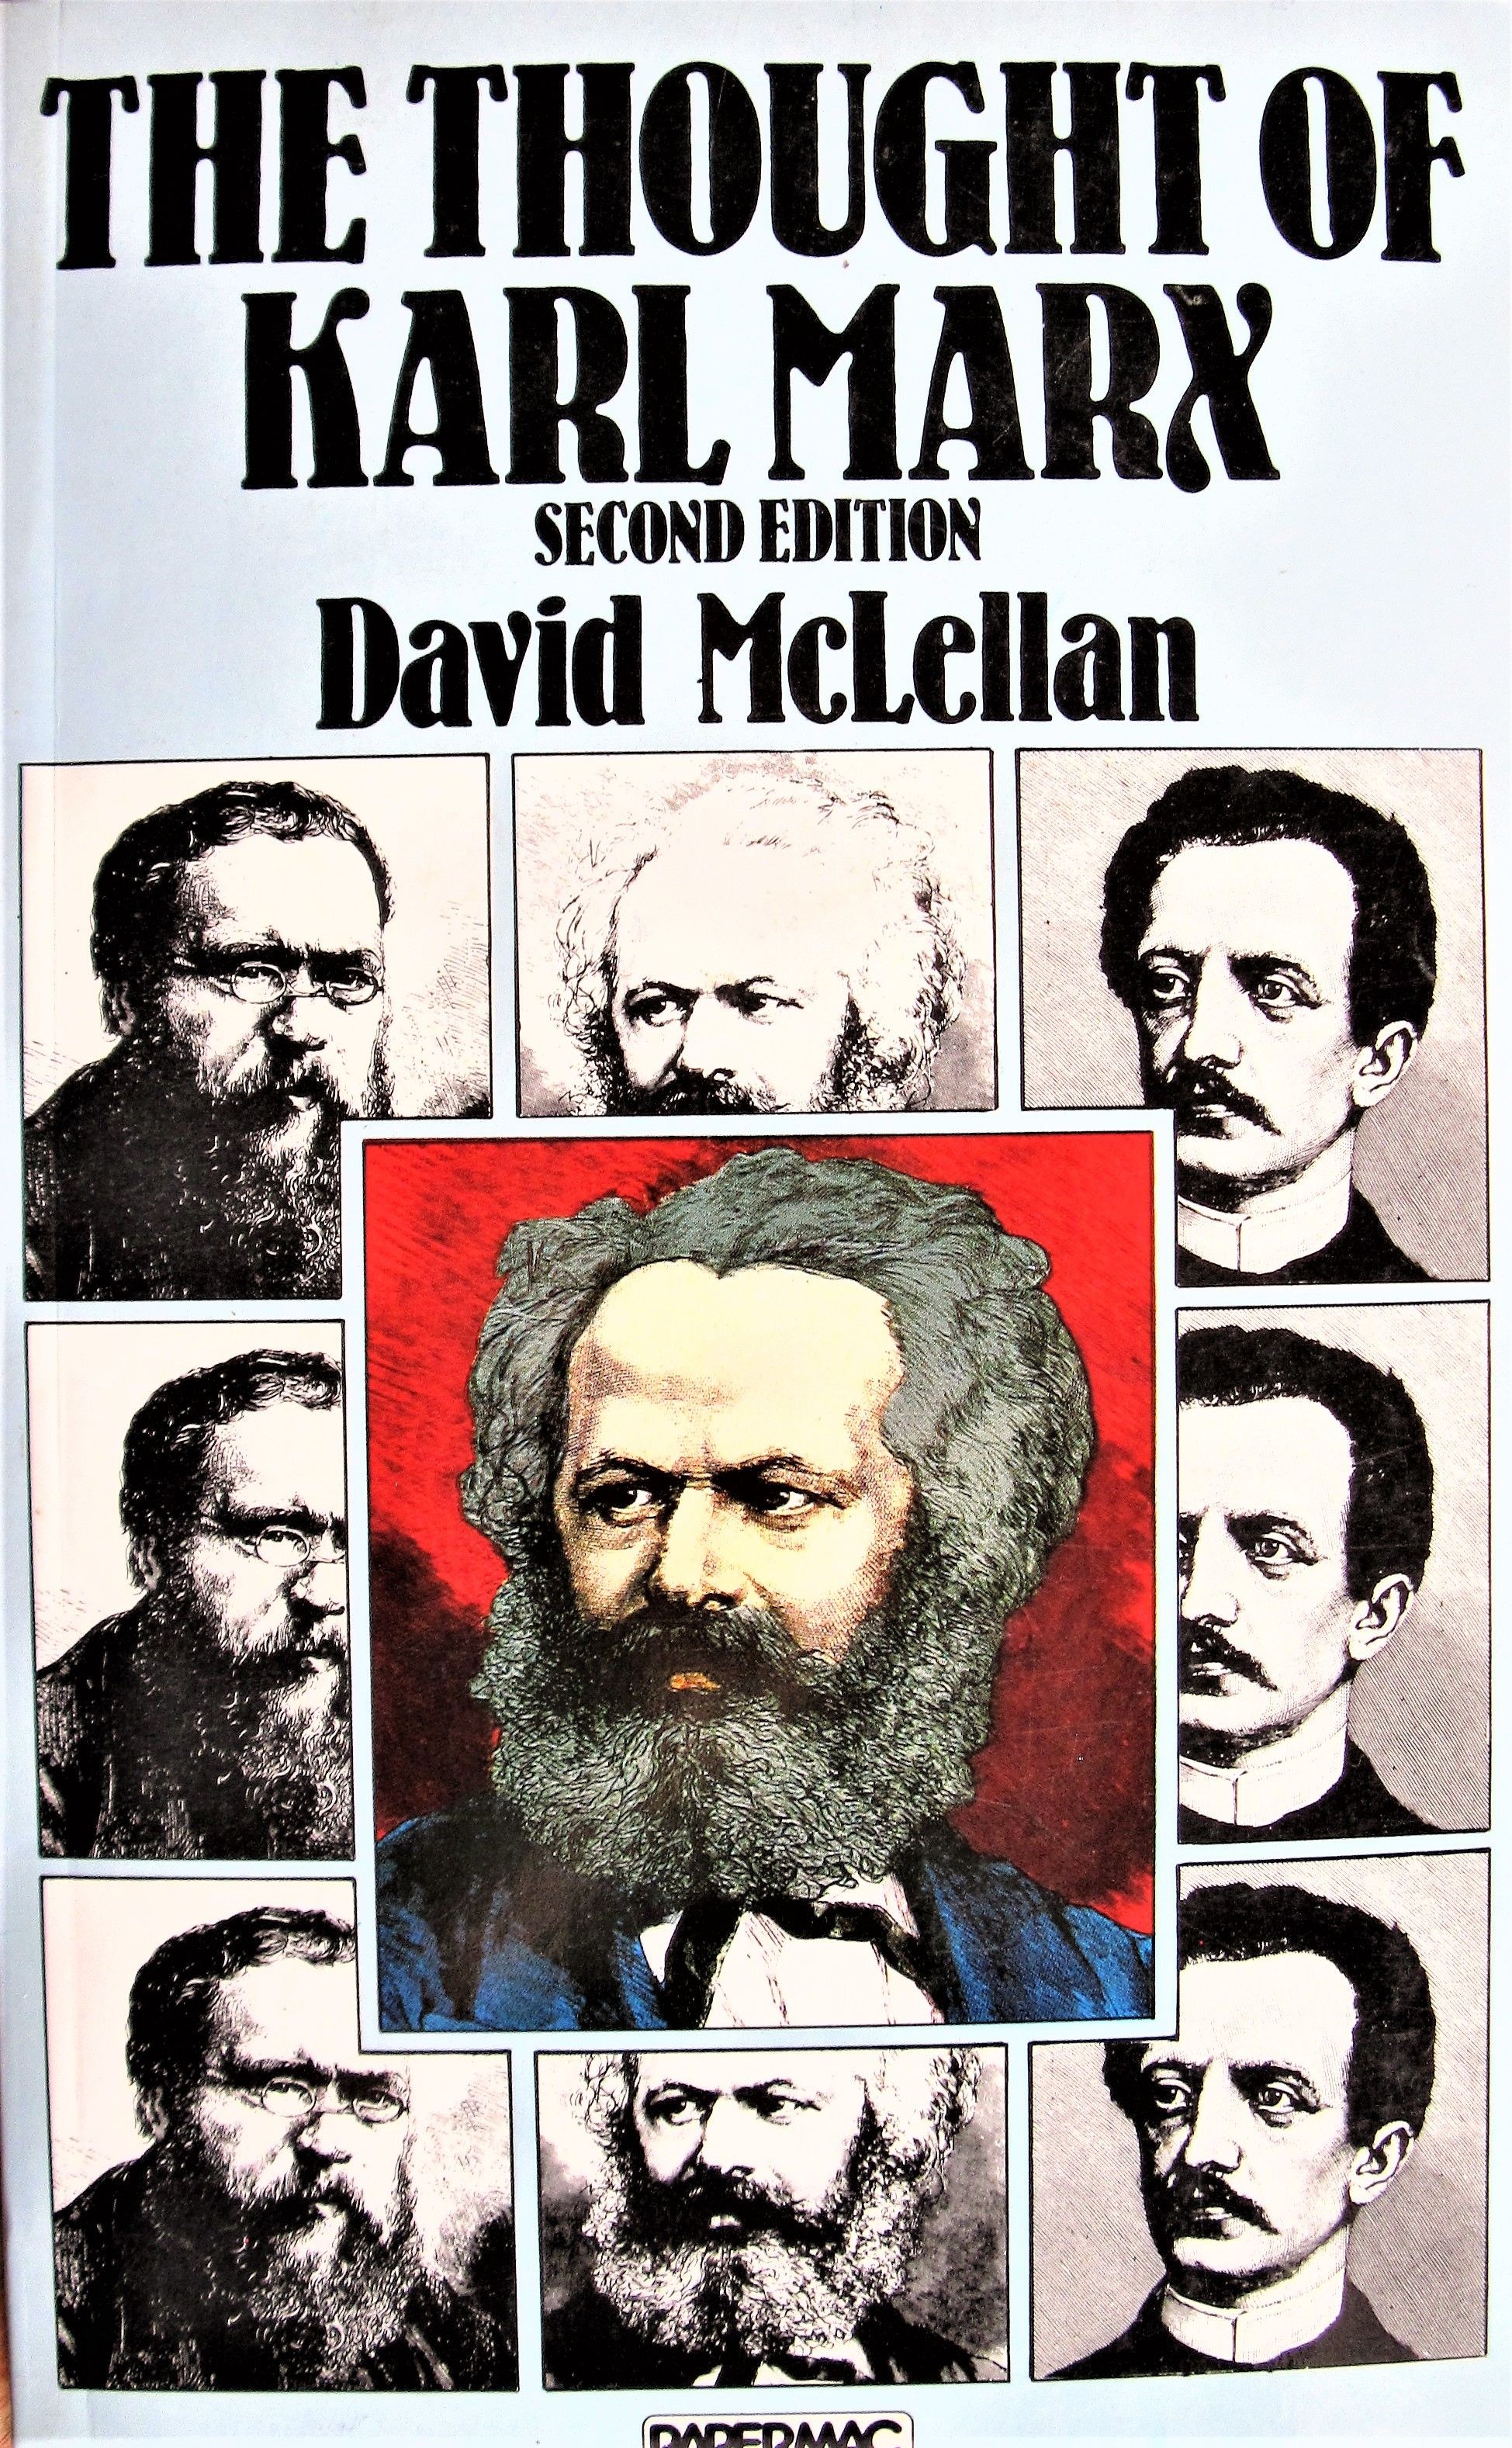 The Thought of Karl Marx: second edition